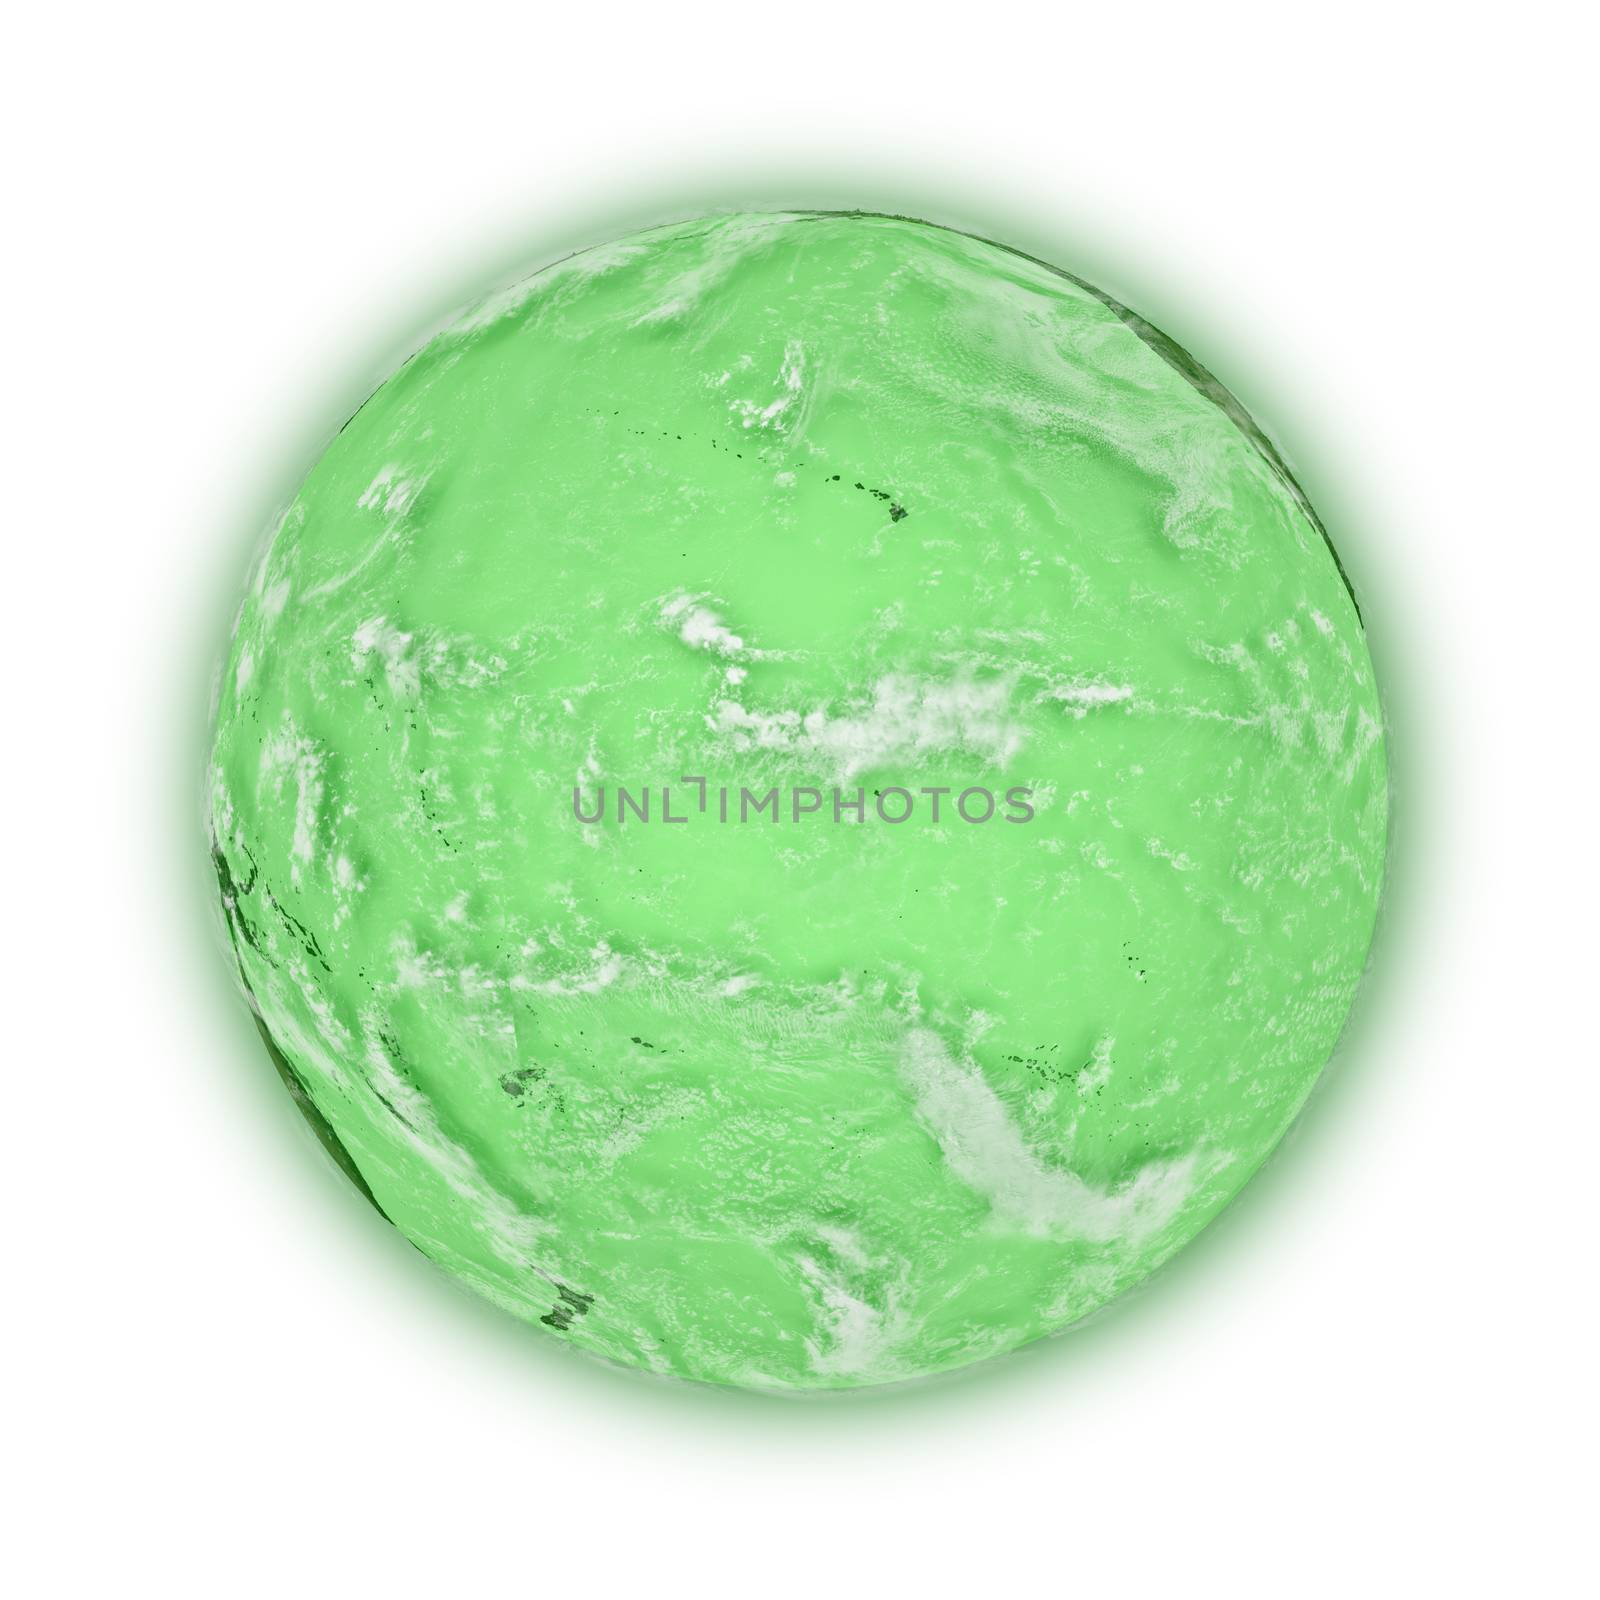 Pacific Ocean on green planet Earth isolated on white background. Highly detailed planet surface. Elements of this image furnished by NASA.